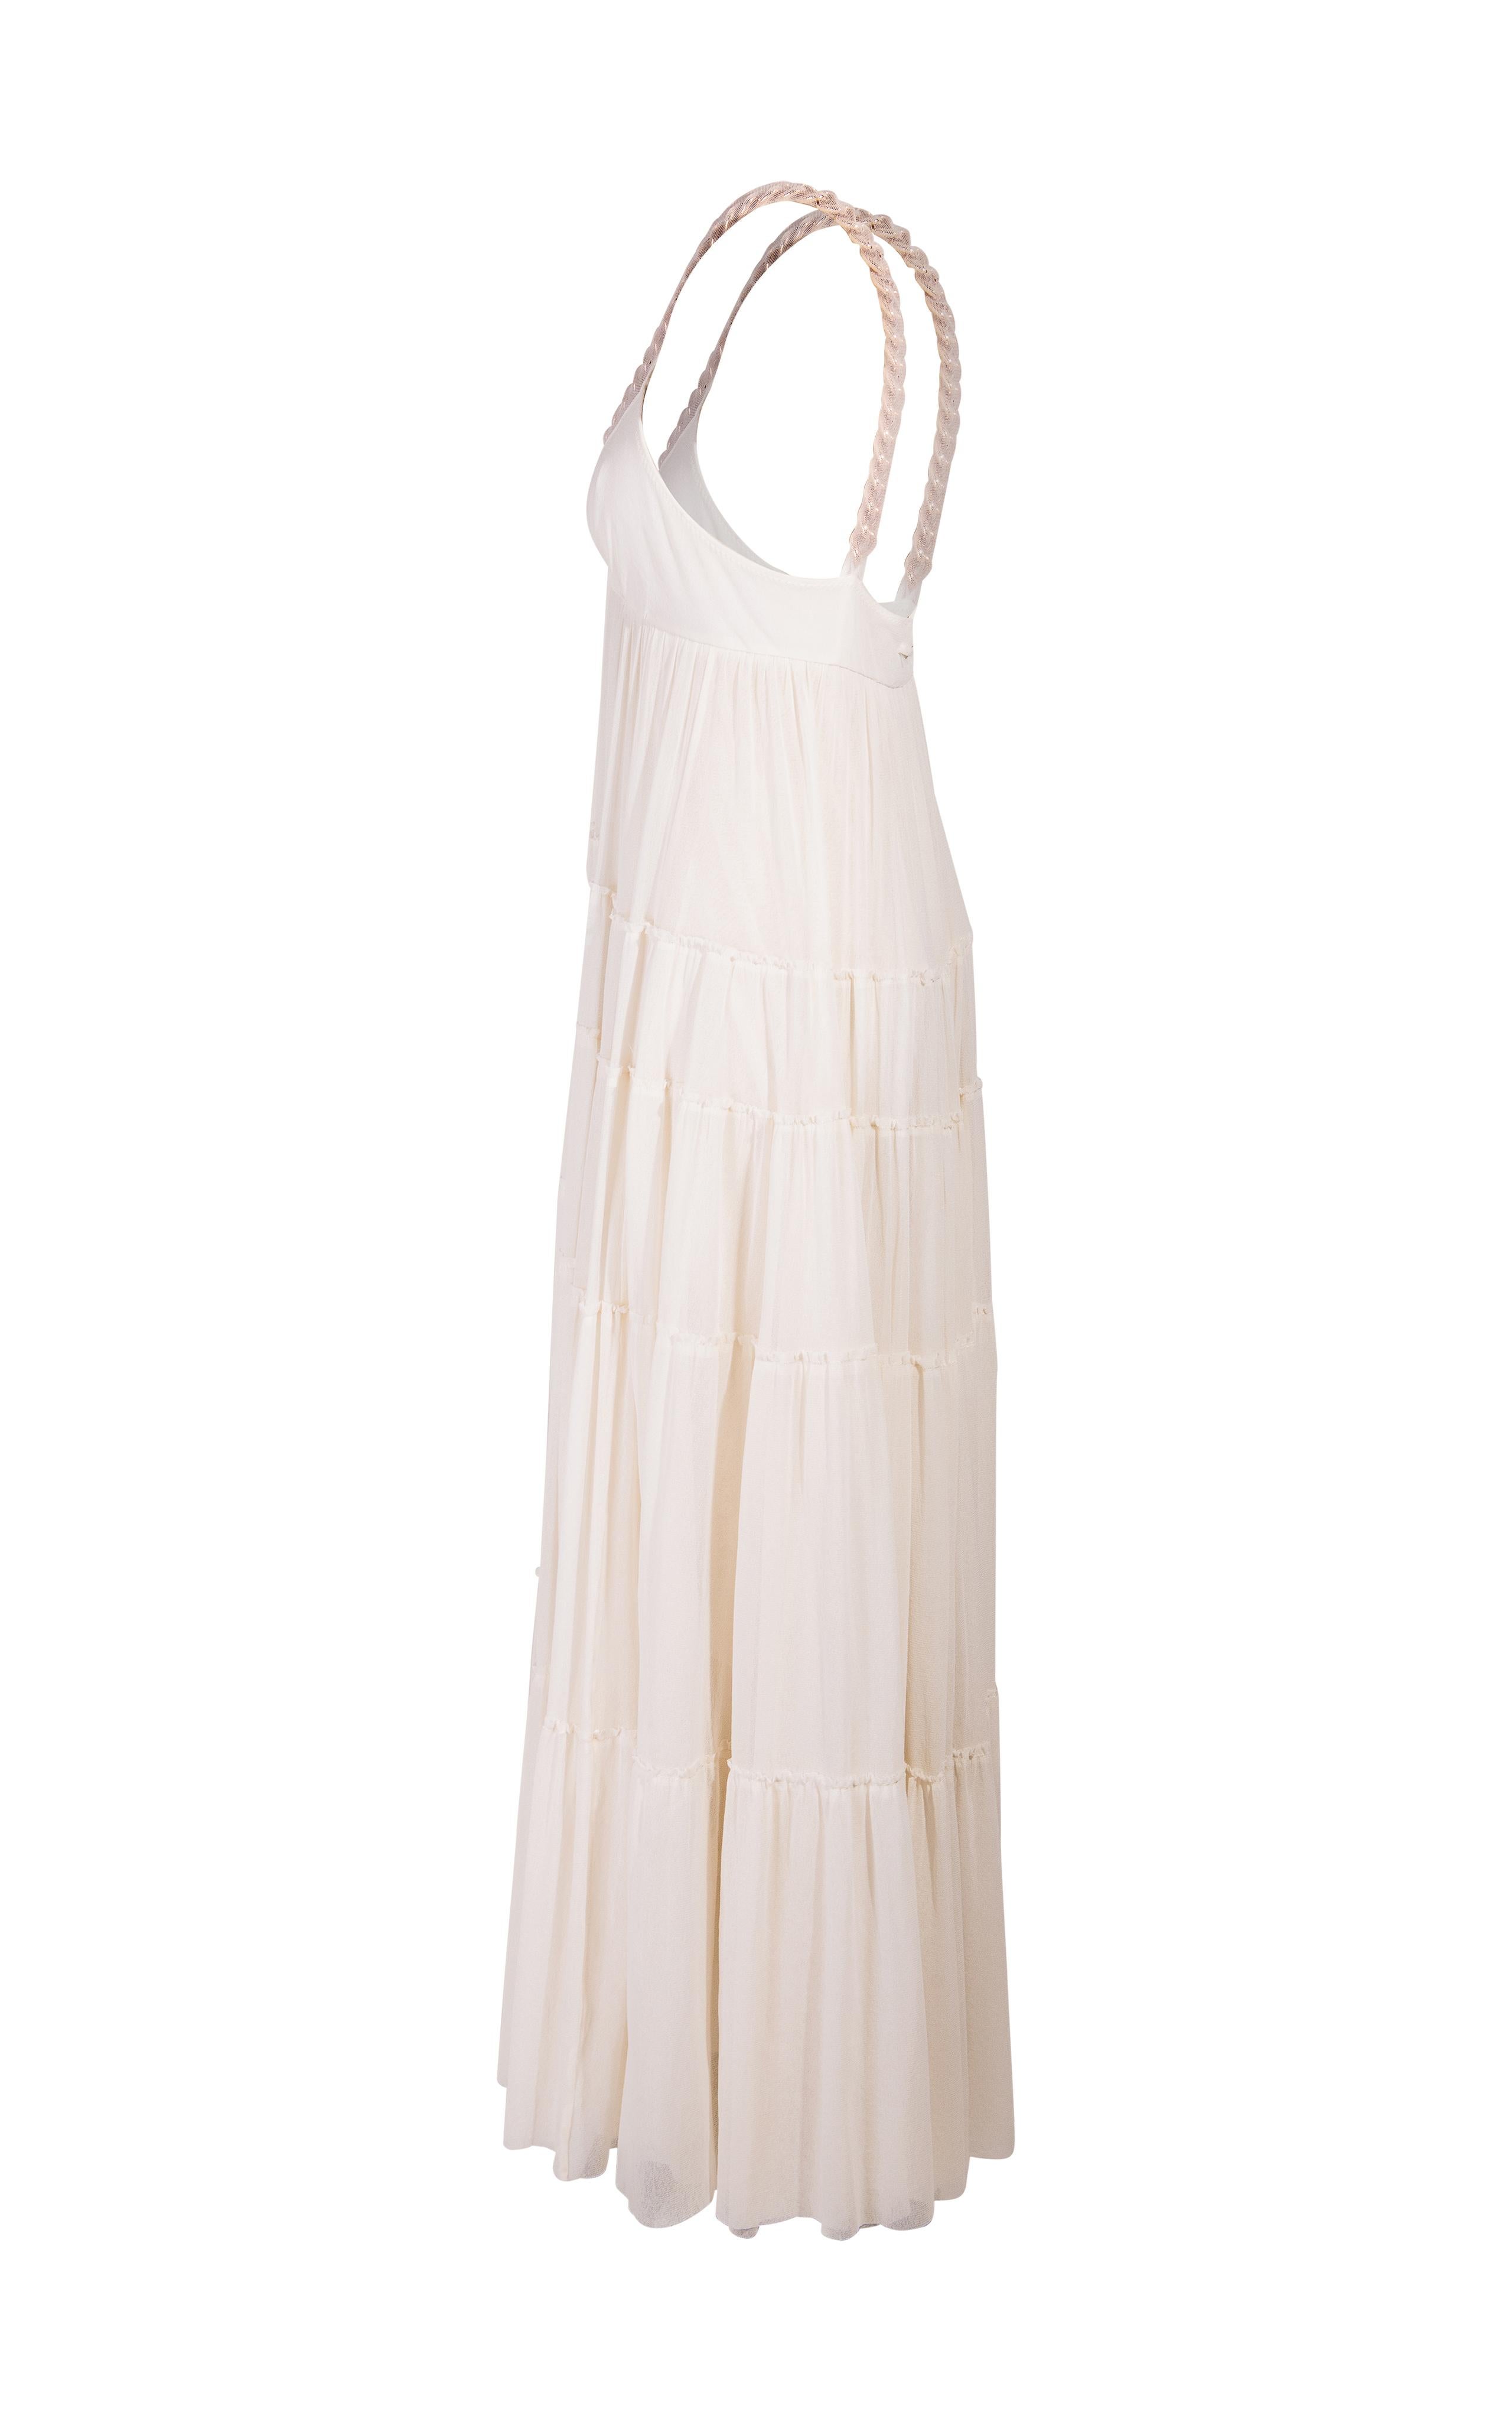 2000's Jean Paul Gaultier 'Soleil' off-white ruffle dress with gold tone chain-link strap accents. V-neck nylon mesh dress with tiered full skirt. White mesh overlay covers chain straps. Features elastic band underneath bust. Moderate stretch